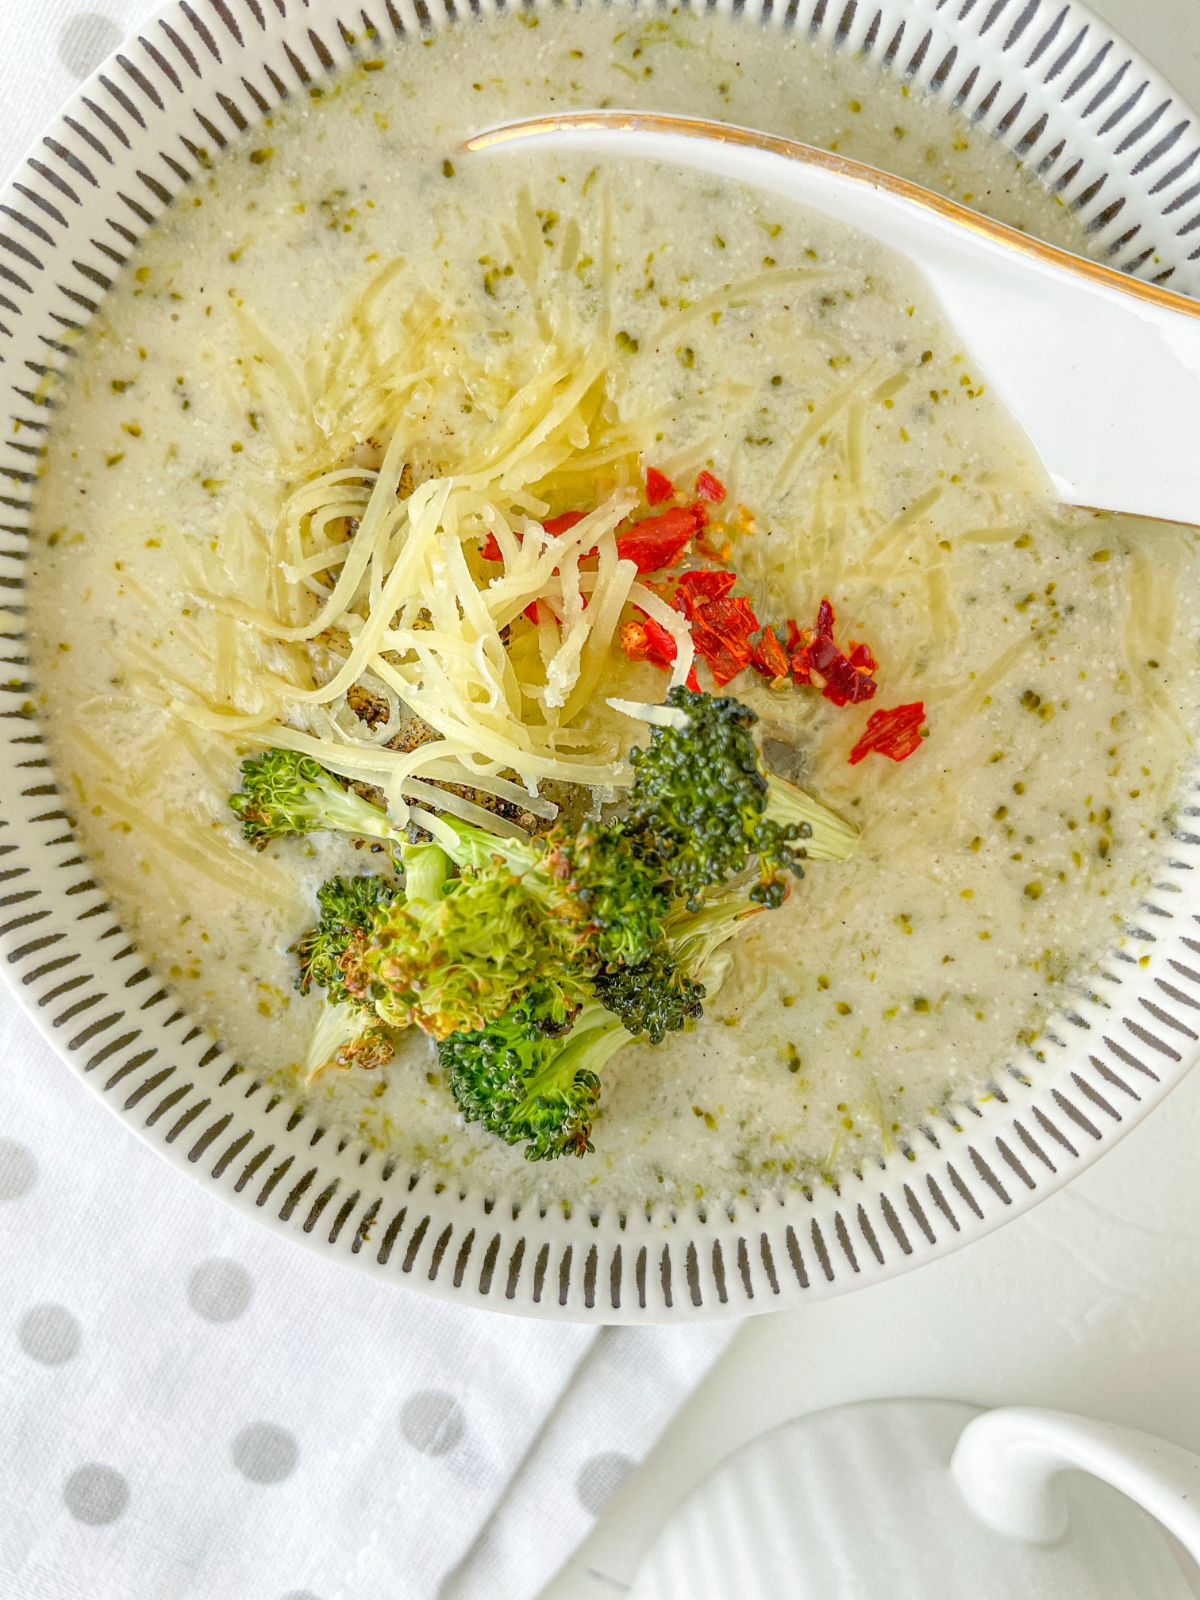 top view of Vegetarian Broccoli Cheddar Soup